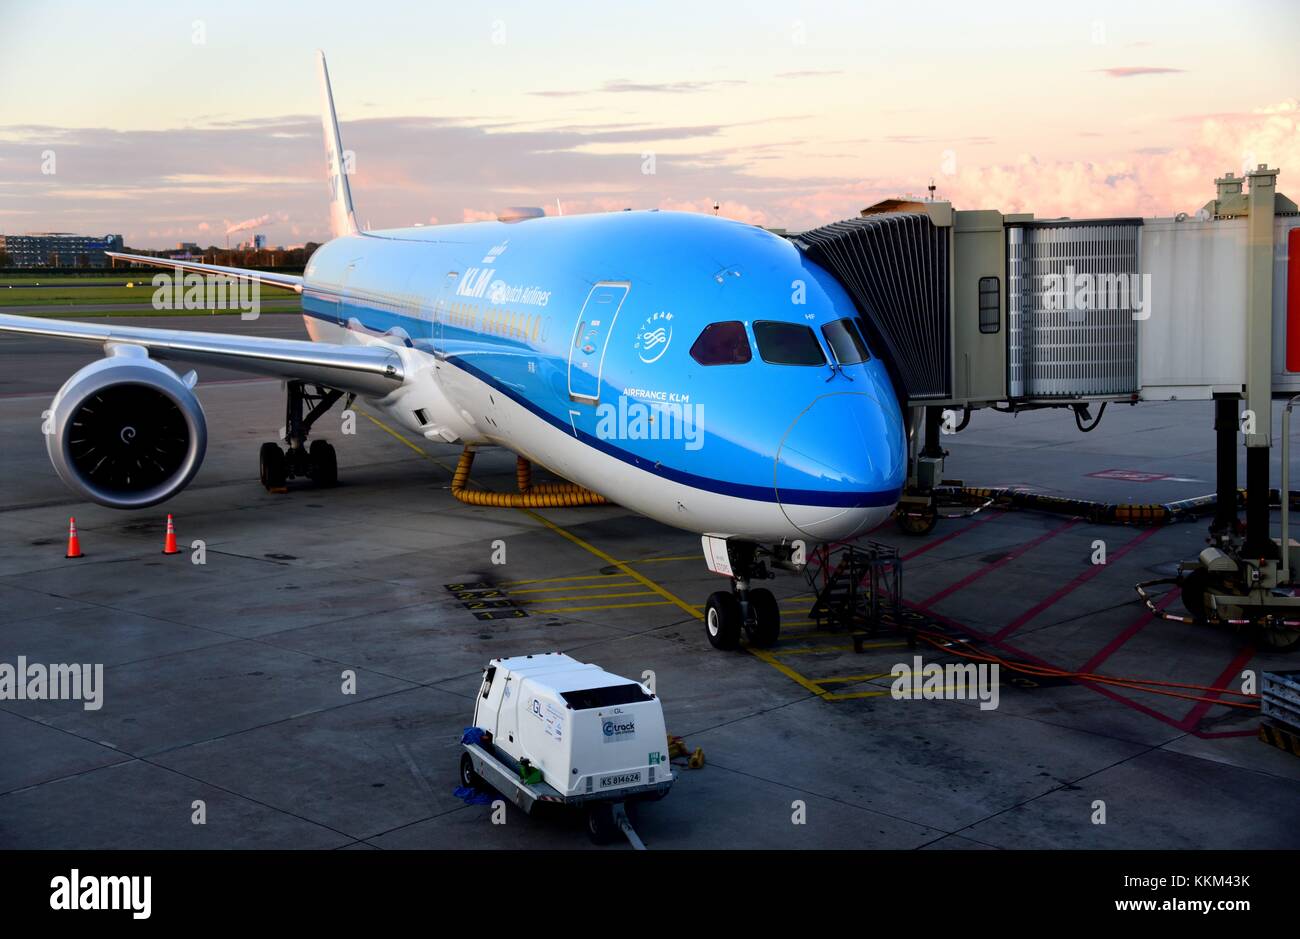 An Aircraft Type Boeing 787 9 Of The Airline Klm Royal Dutch